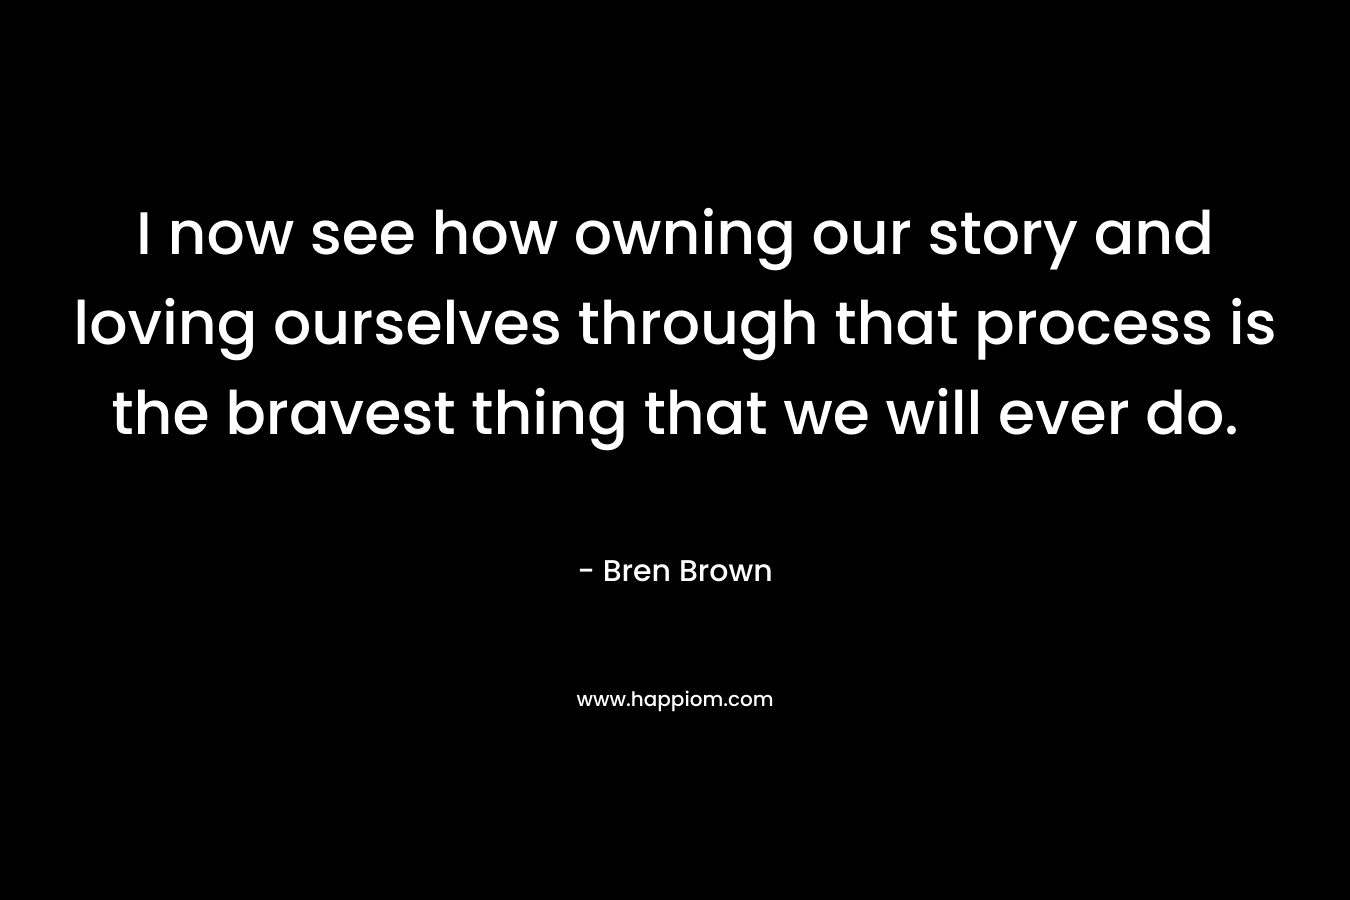 I now see how owning our story and loving ourselves through that process is the bravest thing that we will ever do.